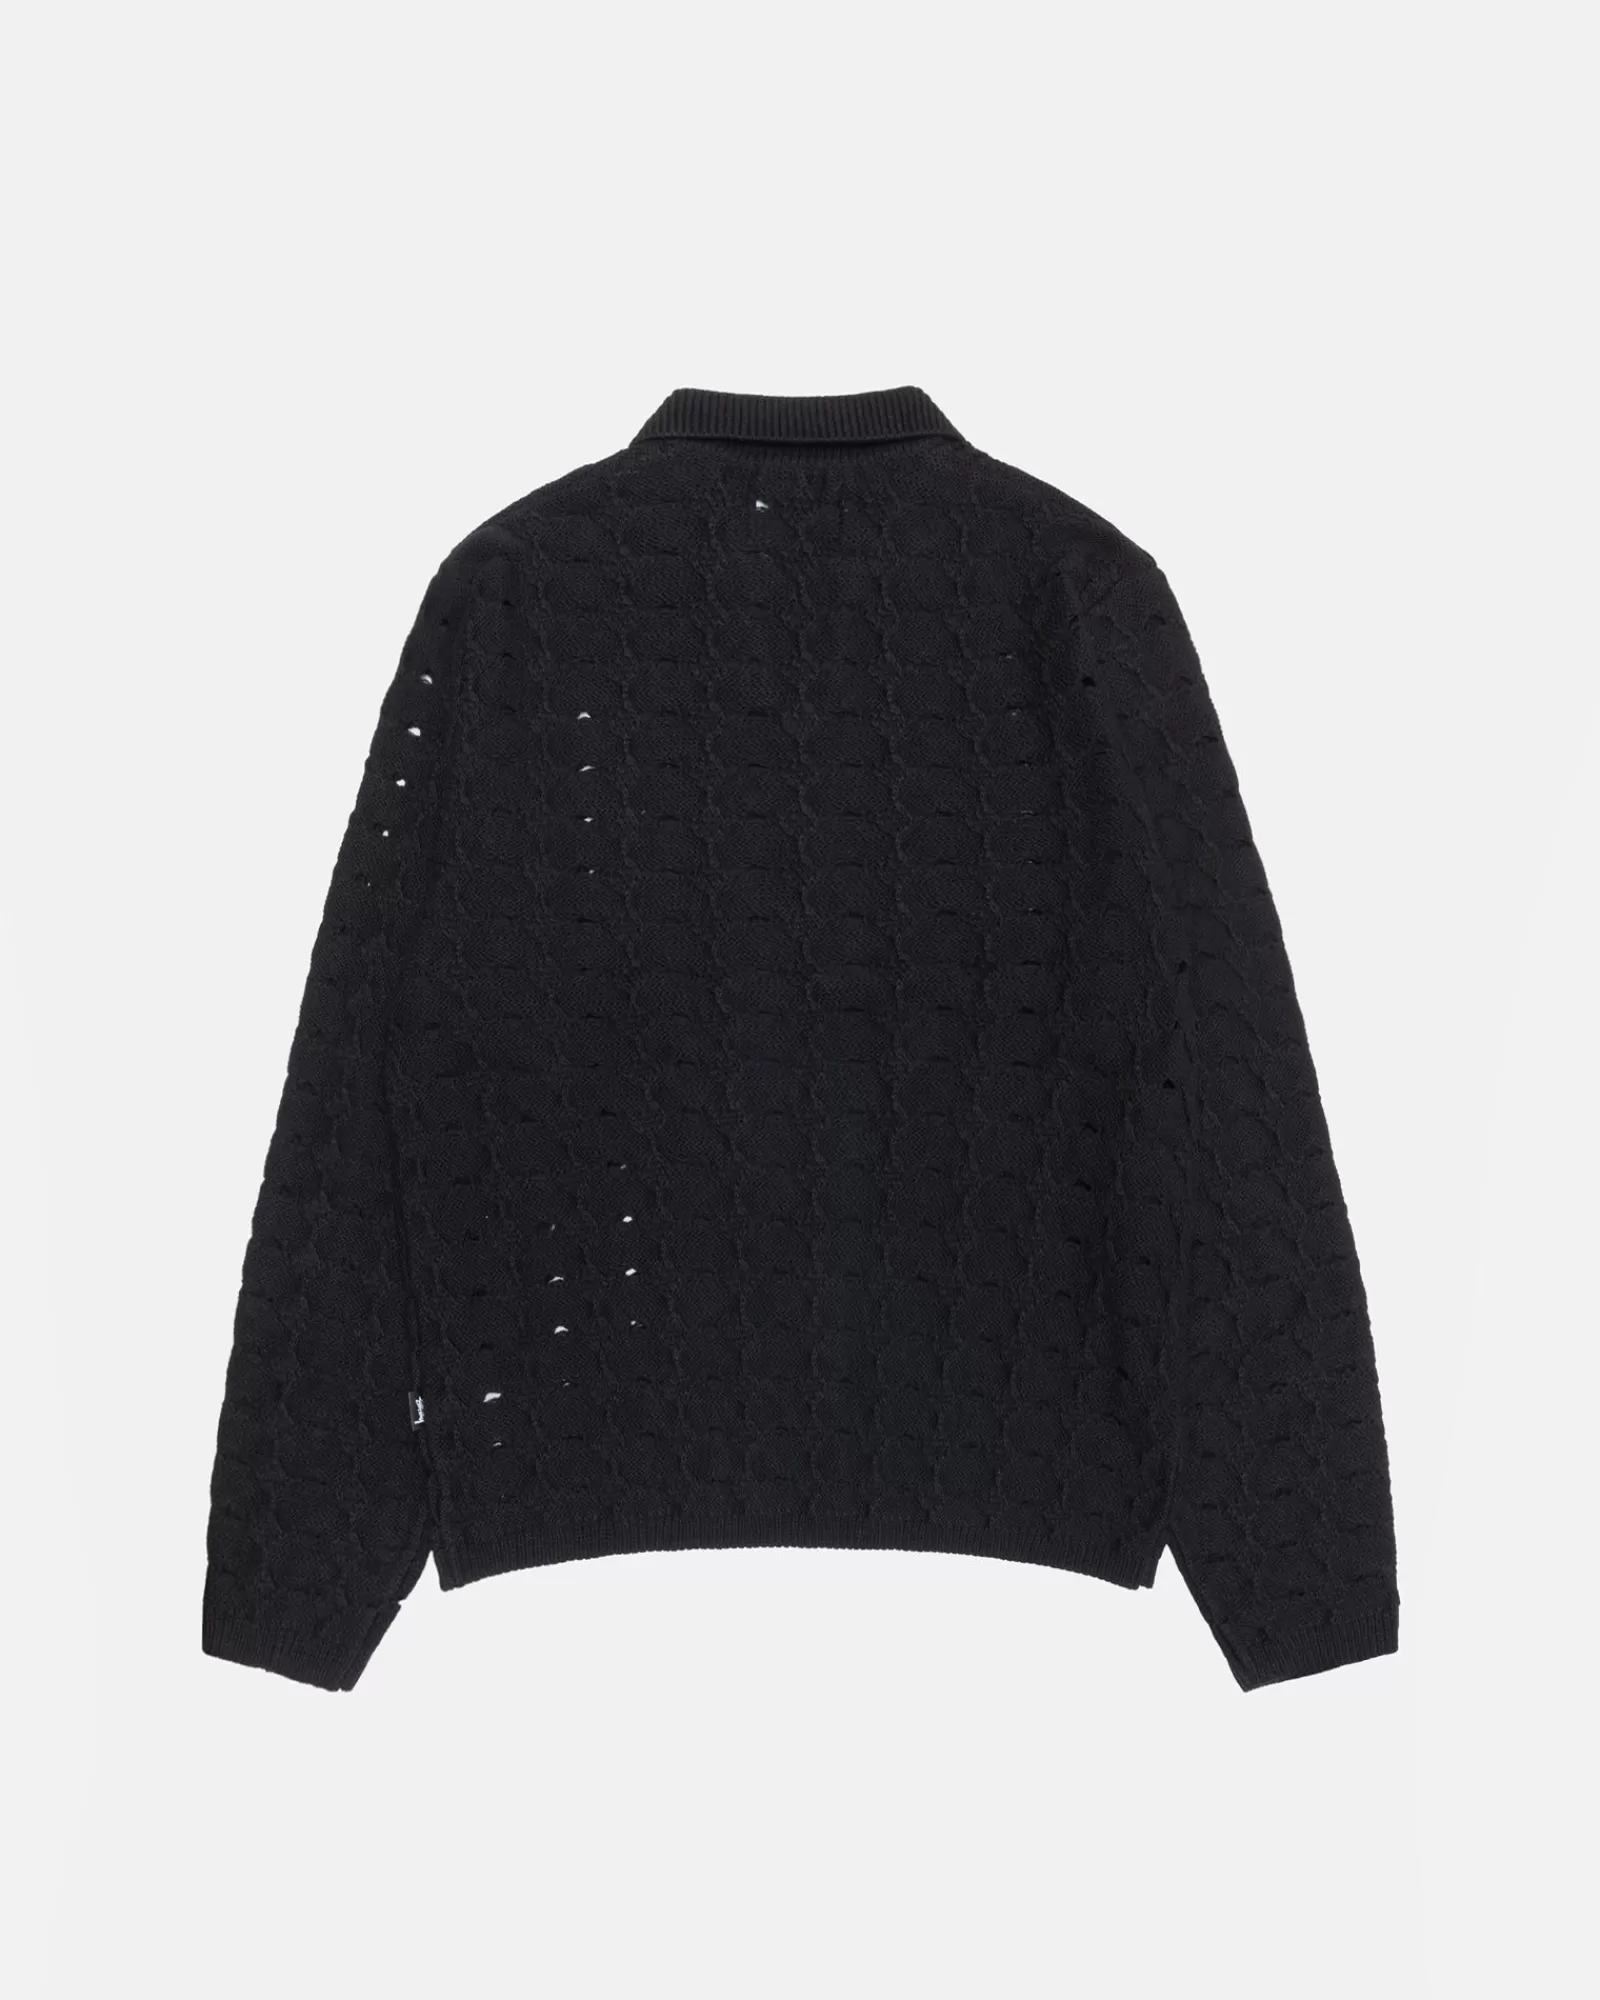 Stüssy Open Knit Collared Sweater Clearance